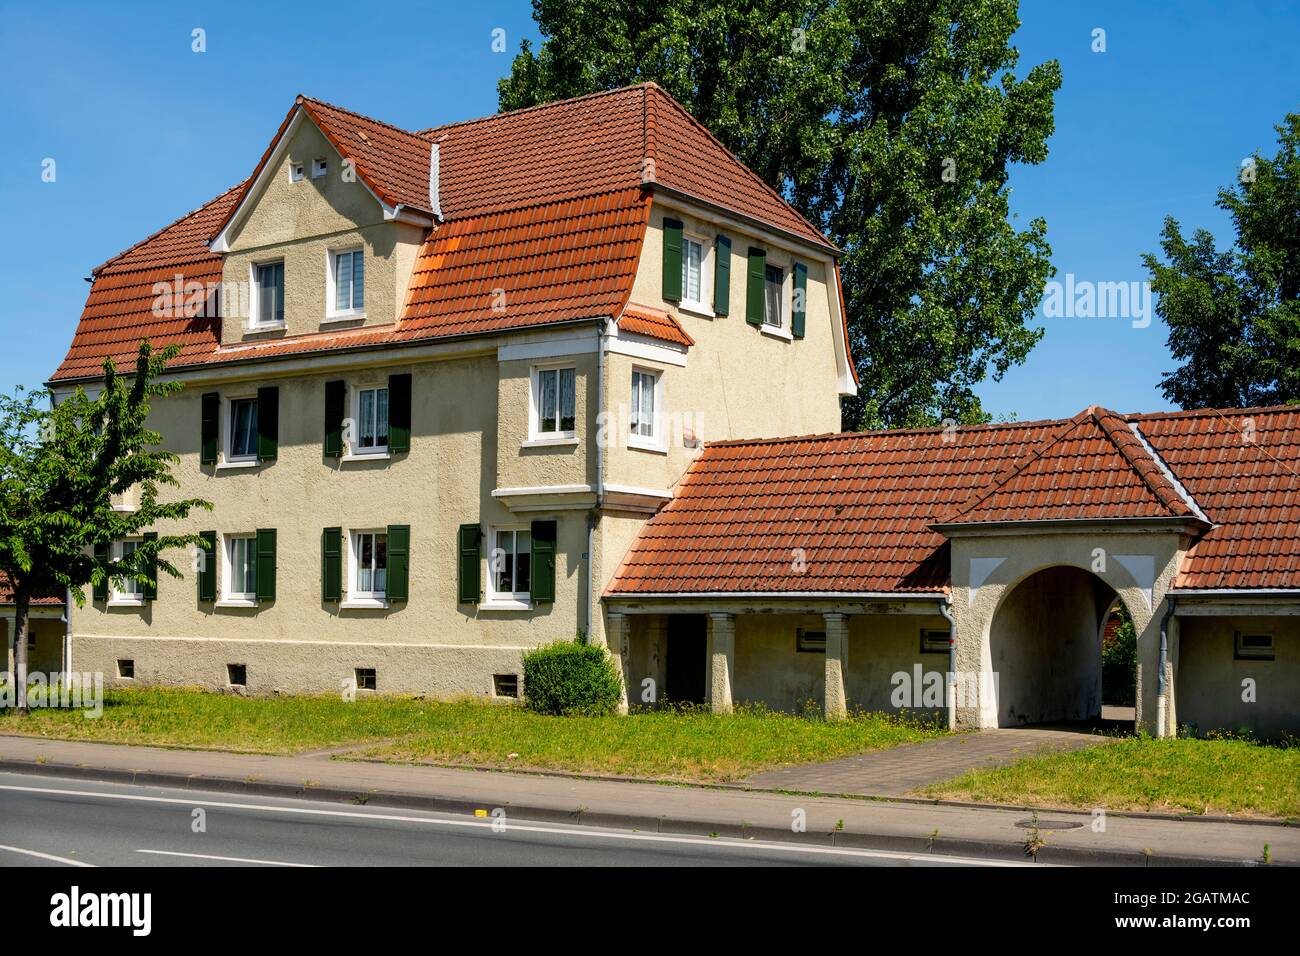 Ger Hof High Resolution Stock Photography and Images - Alamy